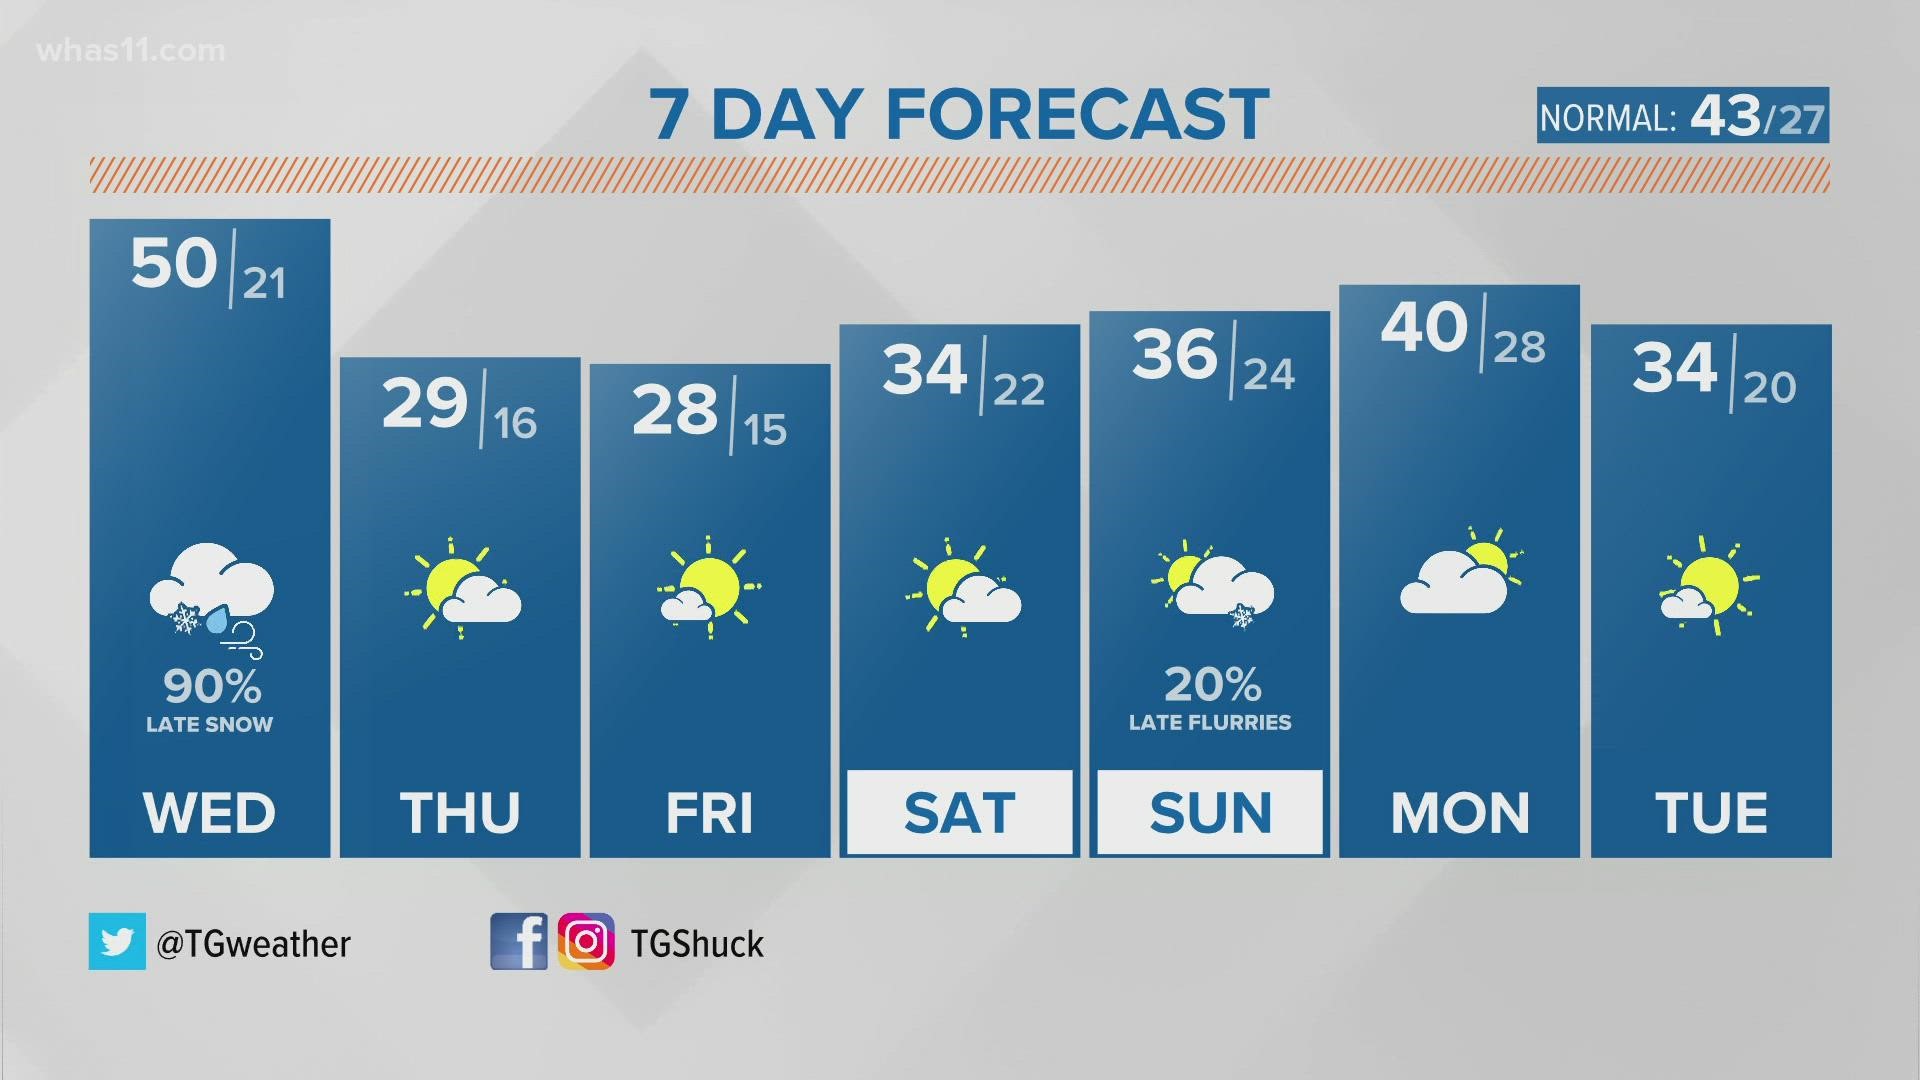 Late snow tonight dropping temperatures back into the 20s Thursday and Friday.